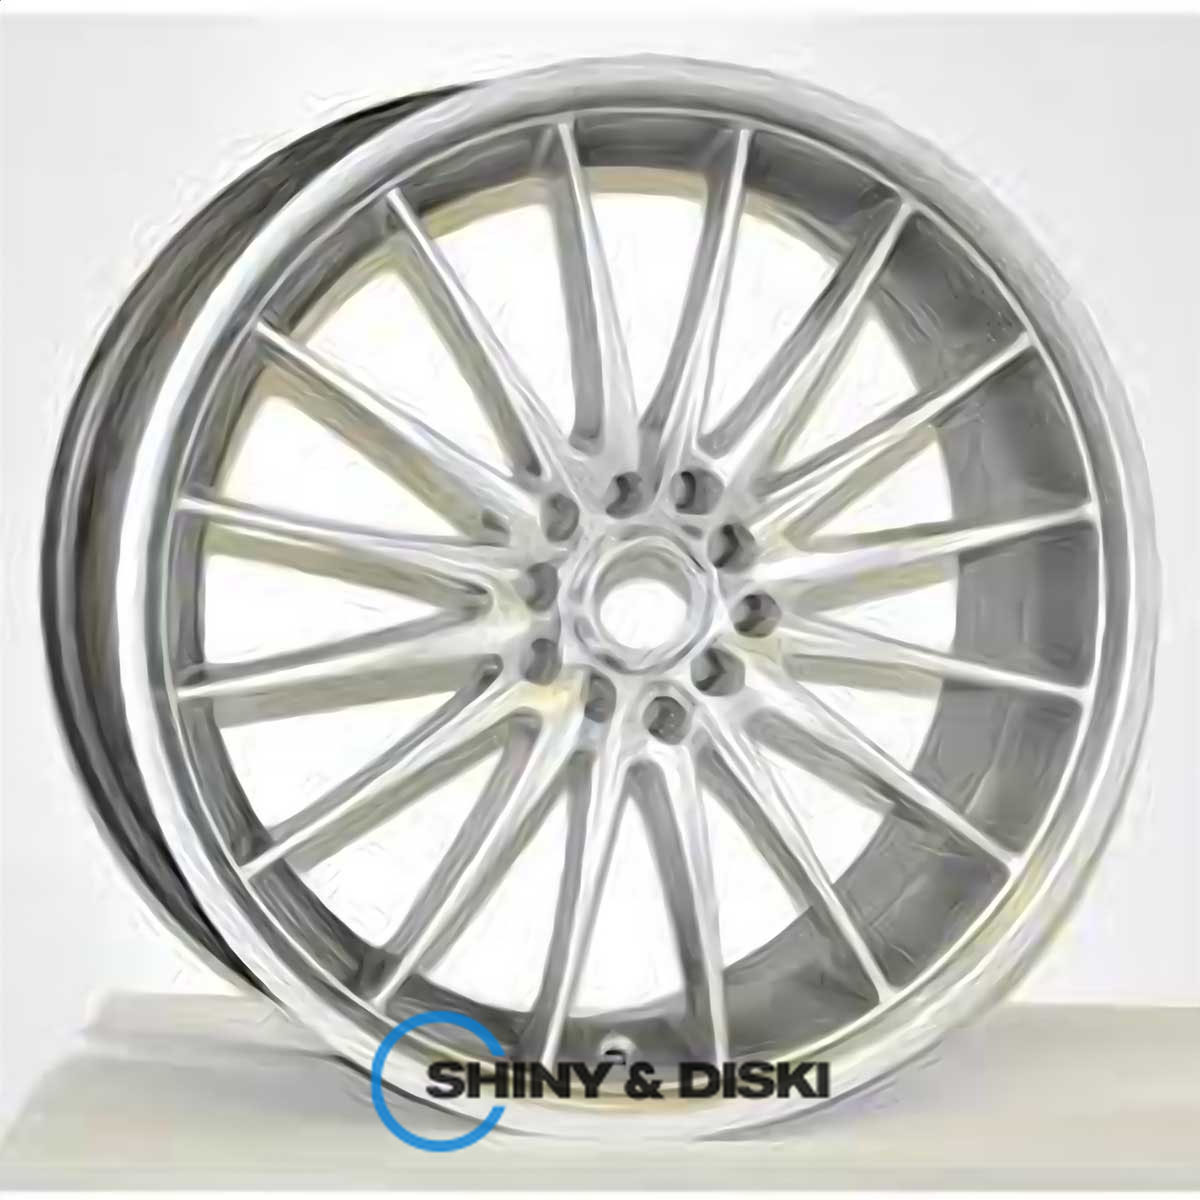 rs tuning 702 mlw r16 w7 pcd5x114.3 et40 dia69.1